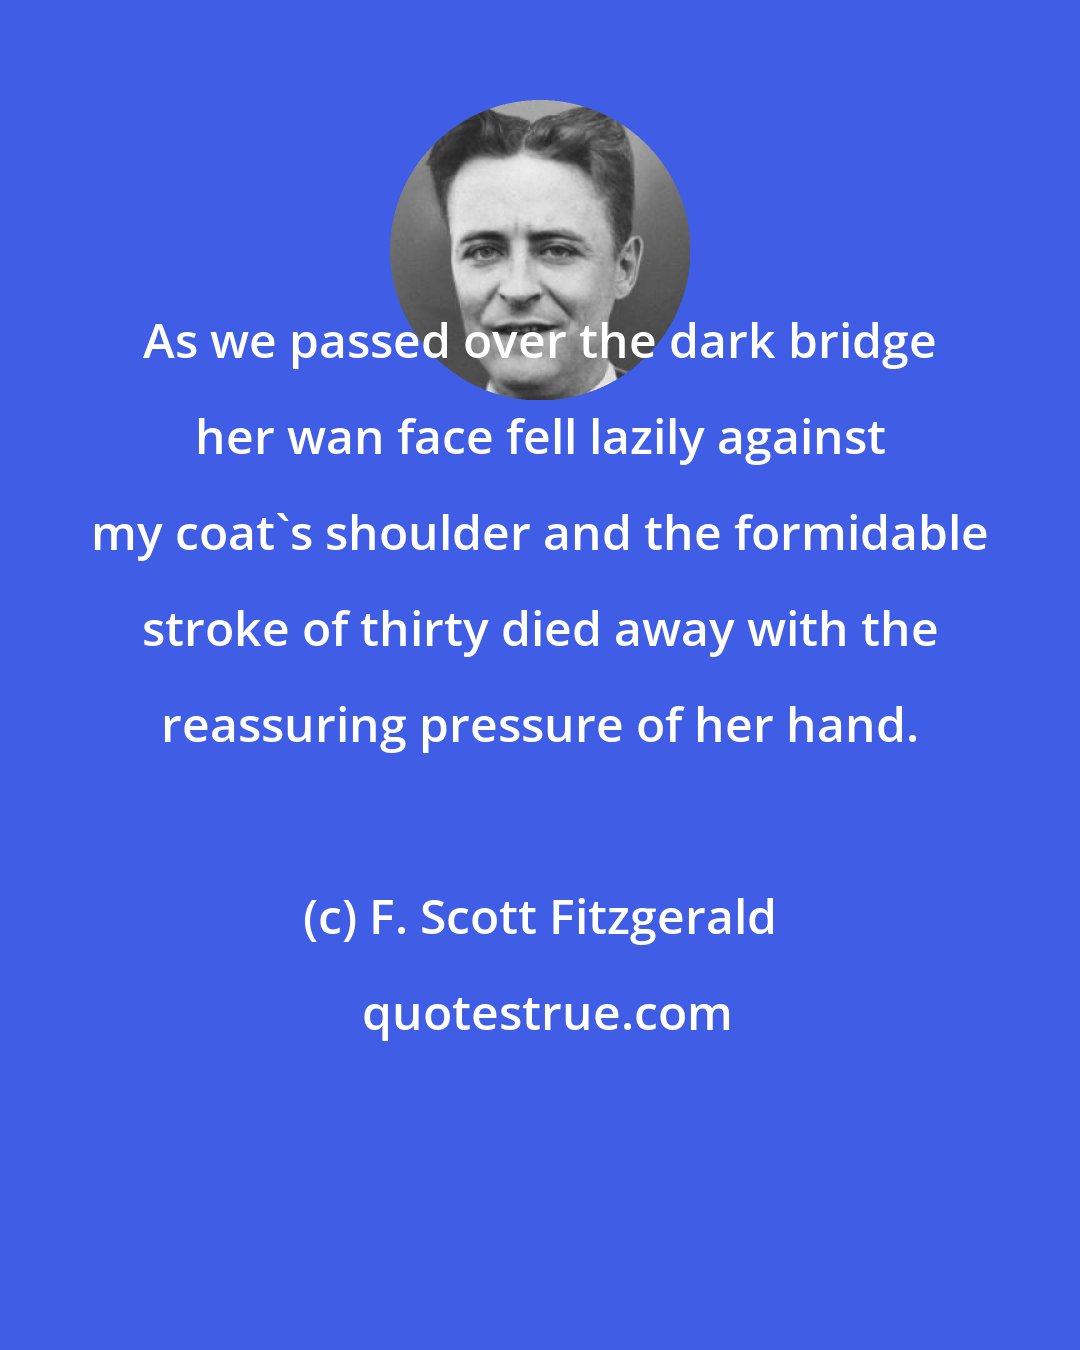 F. Scott Fitzgerald: As we passed over the dark bridge her wan face fell lazily against my coat's shoulder and the formidable stroke of thirty died away with the reassuring pressure of her hand.